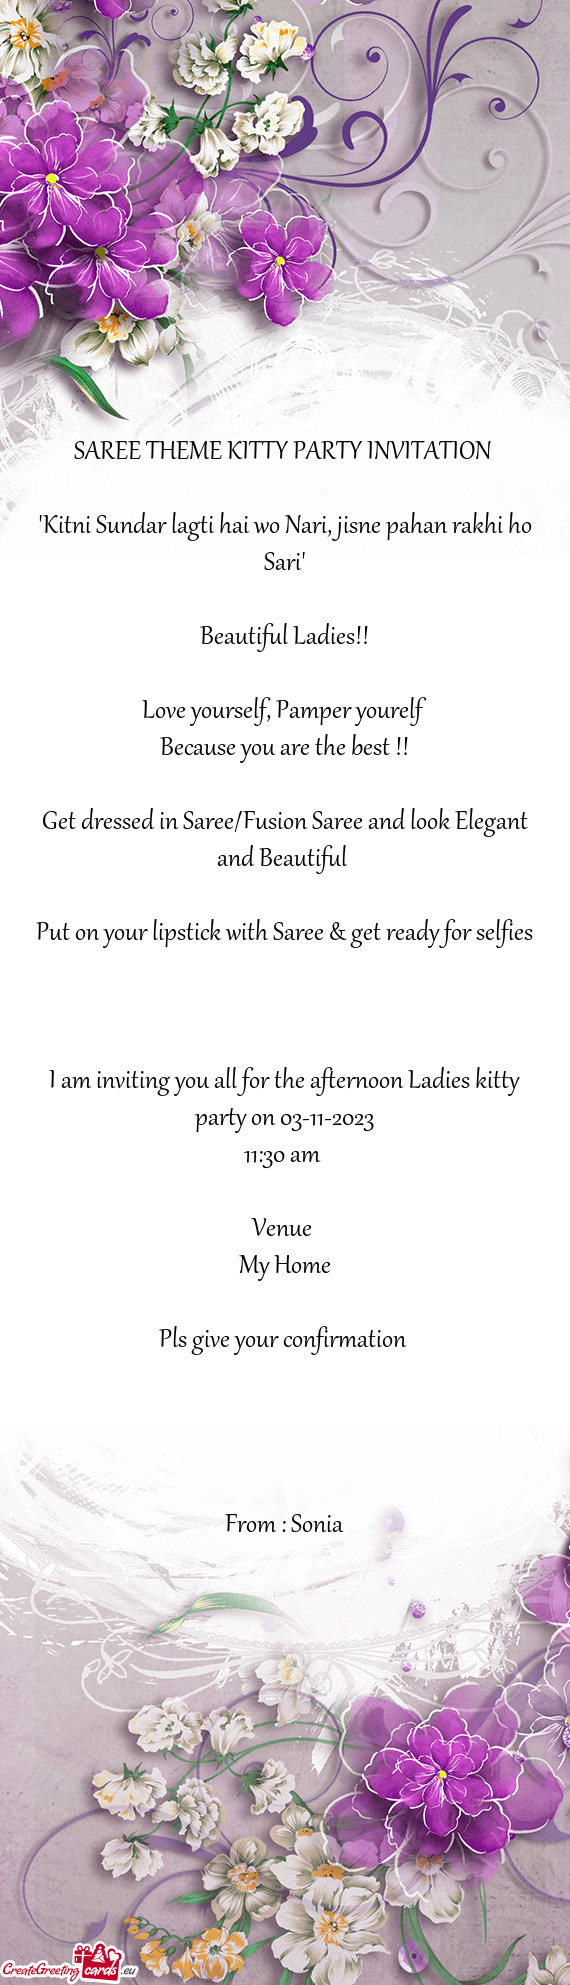 I am inviting you all for the afternoon Ladies kitty party on 03-11-2023